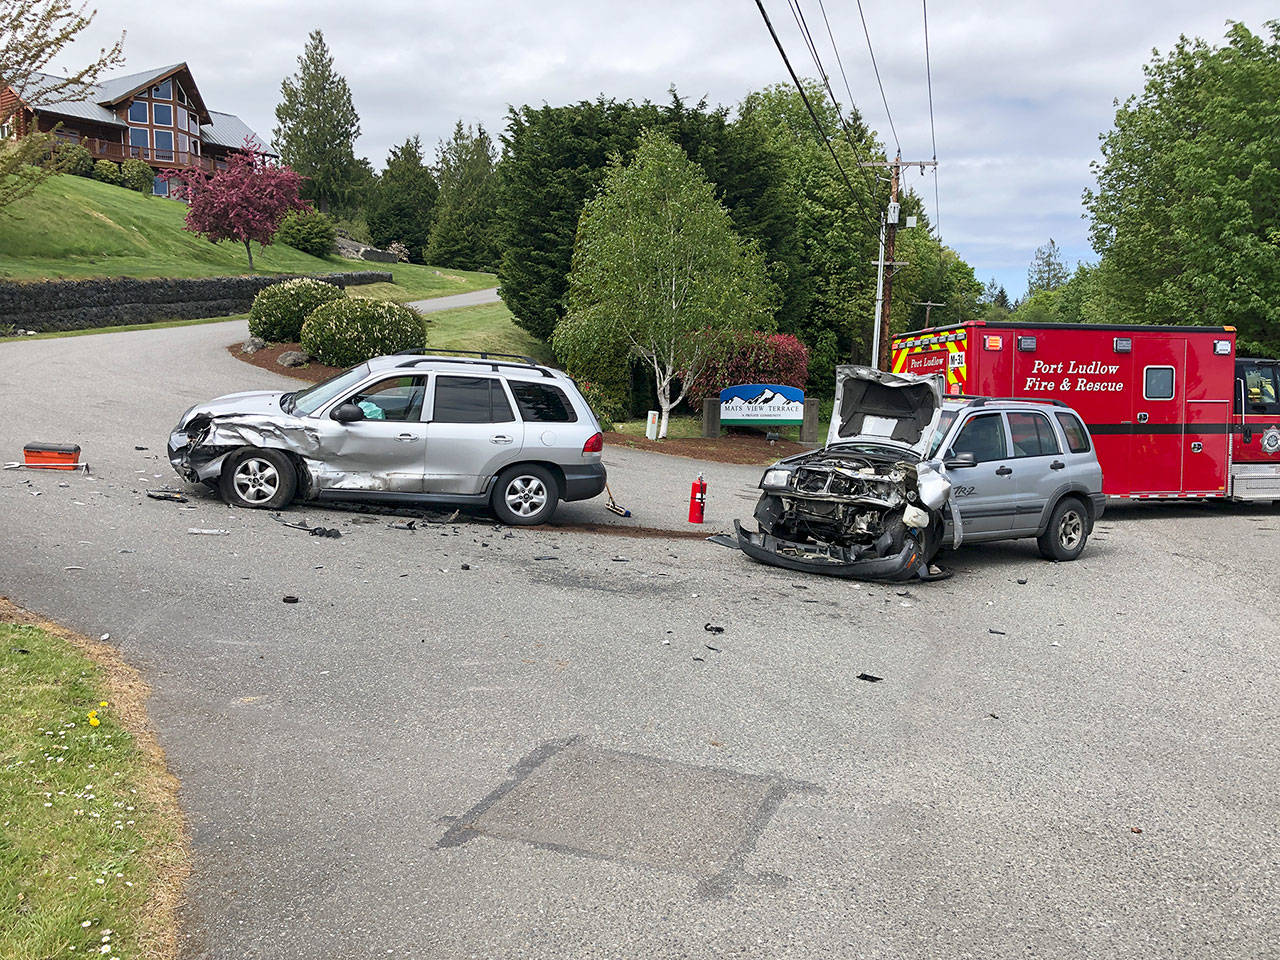 Two vehicles were destroyed in a collision on Oak Bay Road on Tuesday that sent two people to a hospital.(Photo courtesy of Jefferson County Sheriff’s Office)